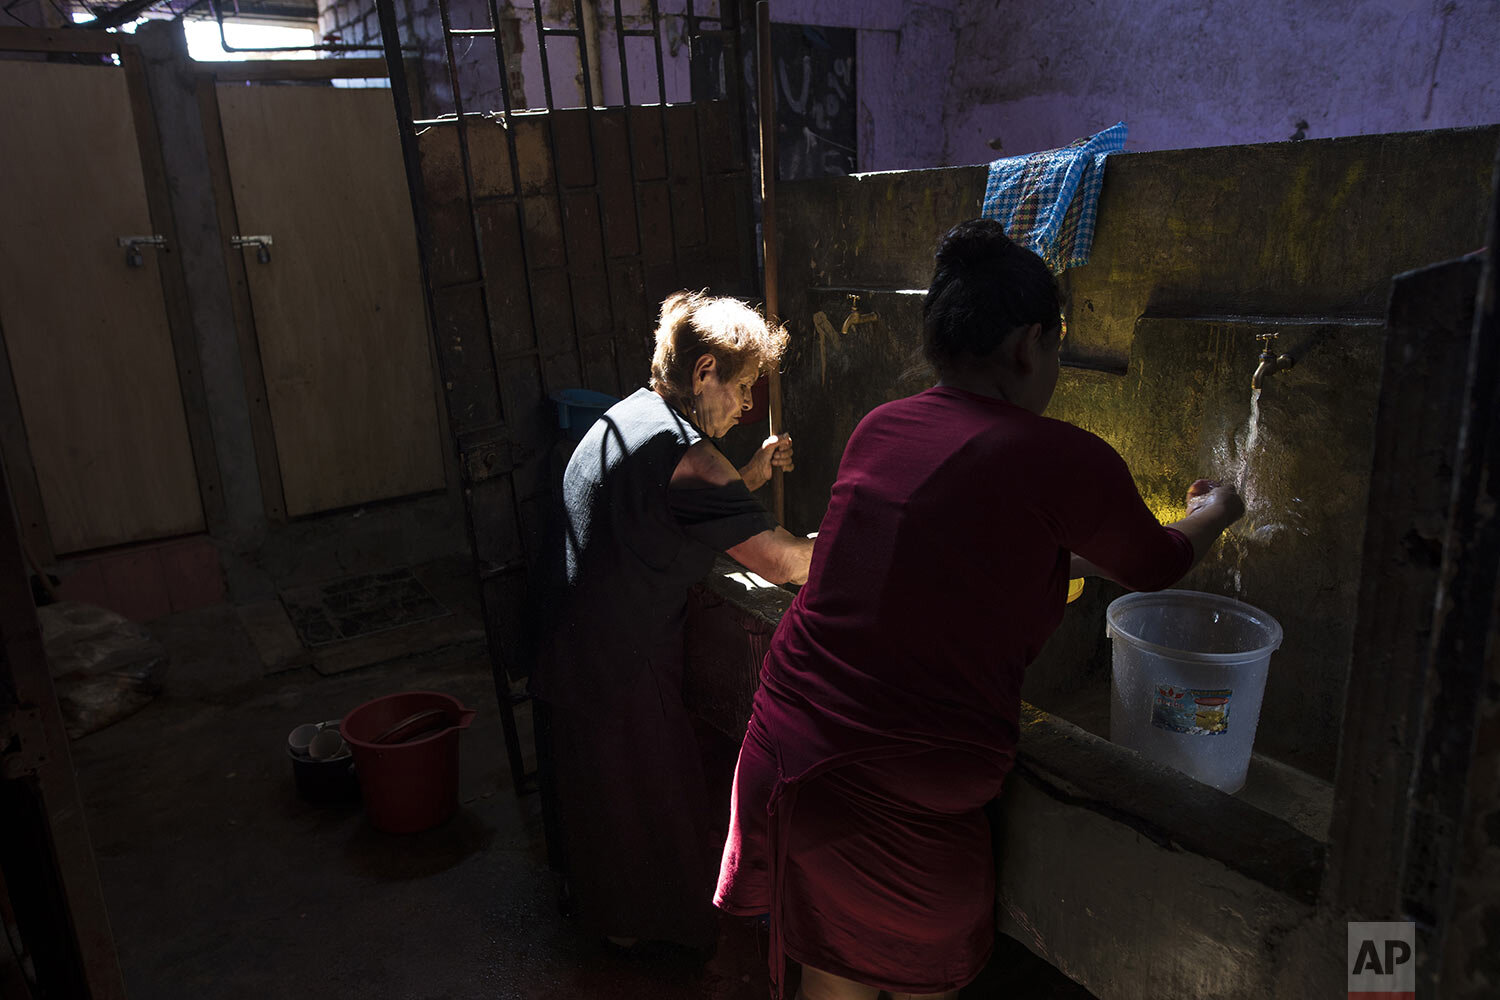  In this March 23, 2020 photo, Maria Isabel Aguinaga washes her clothes in a communal laundry area of a deteriorating building nicknamed “Luriganchito,” after the country’s most populous prison, in Lima, Peru. (AP Photo/Rodrigo Abd) 